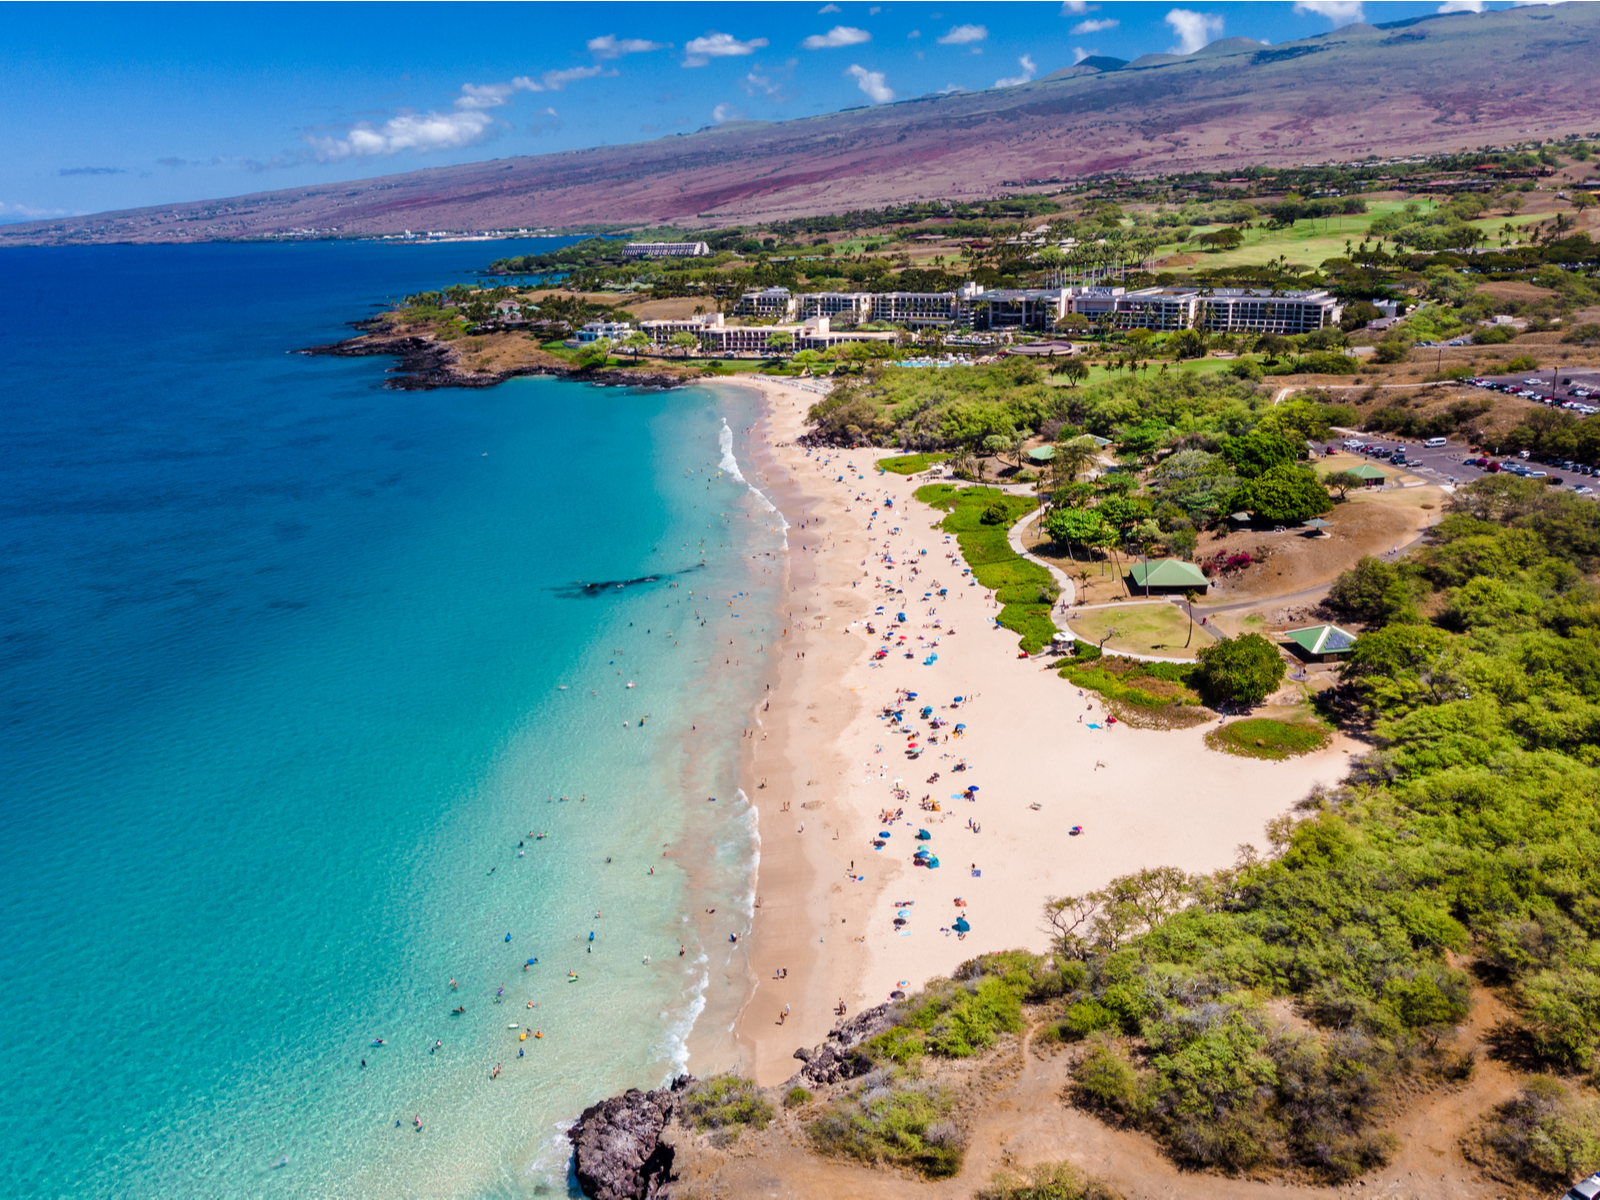 Hapuna Beach State Recreation Area, one of the best beaches in the United States